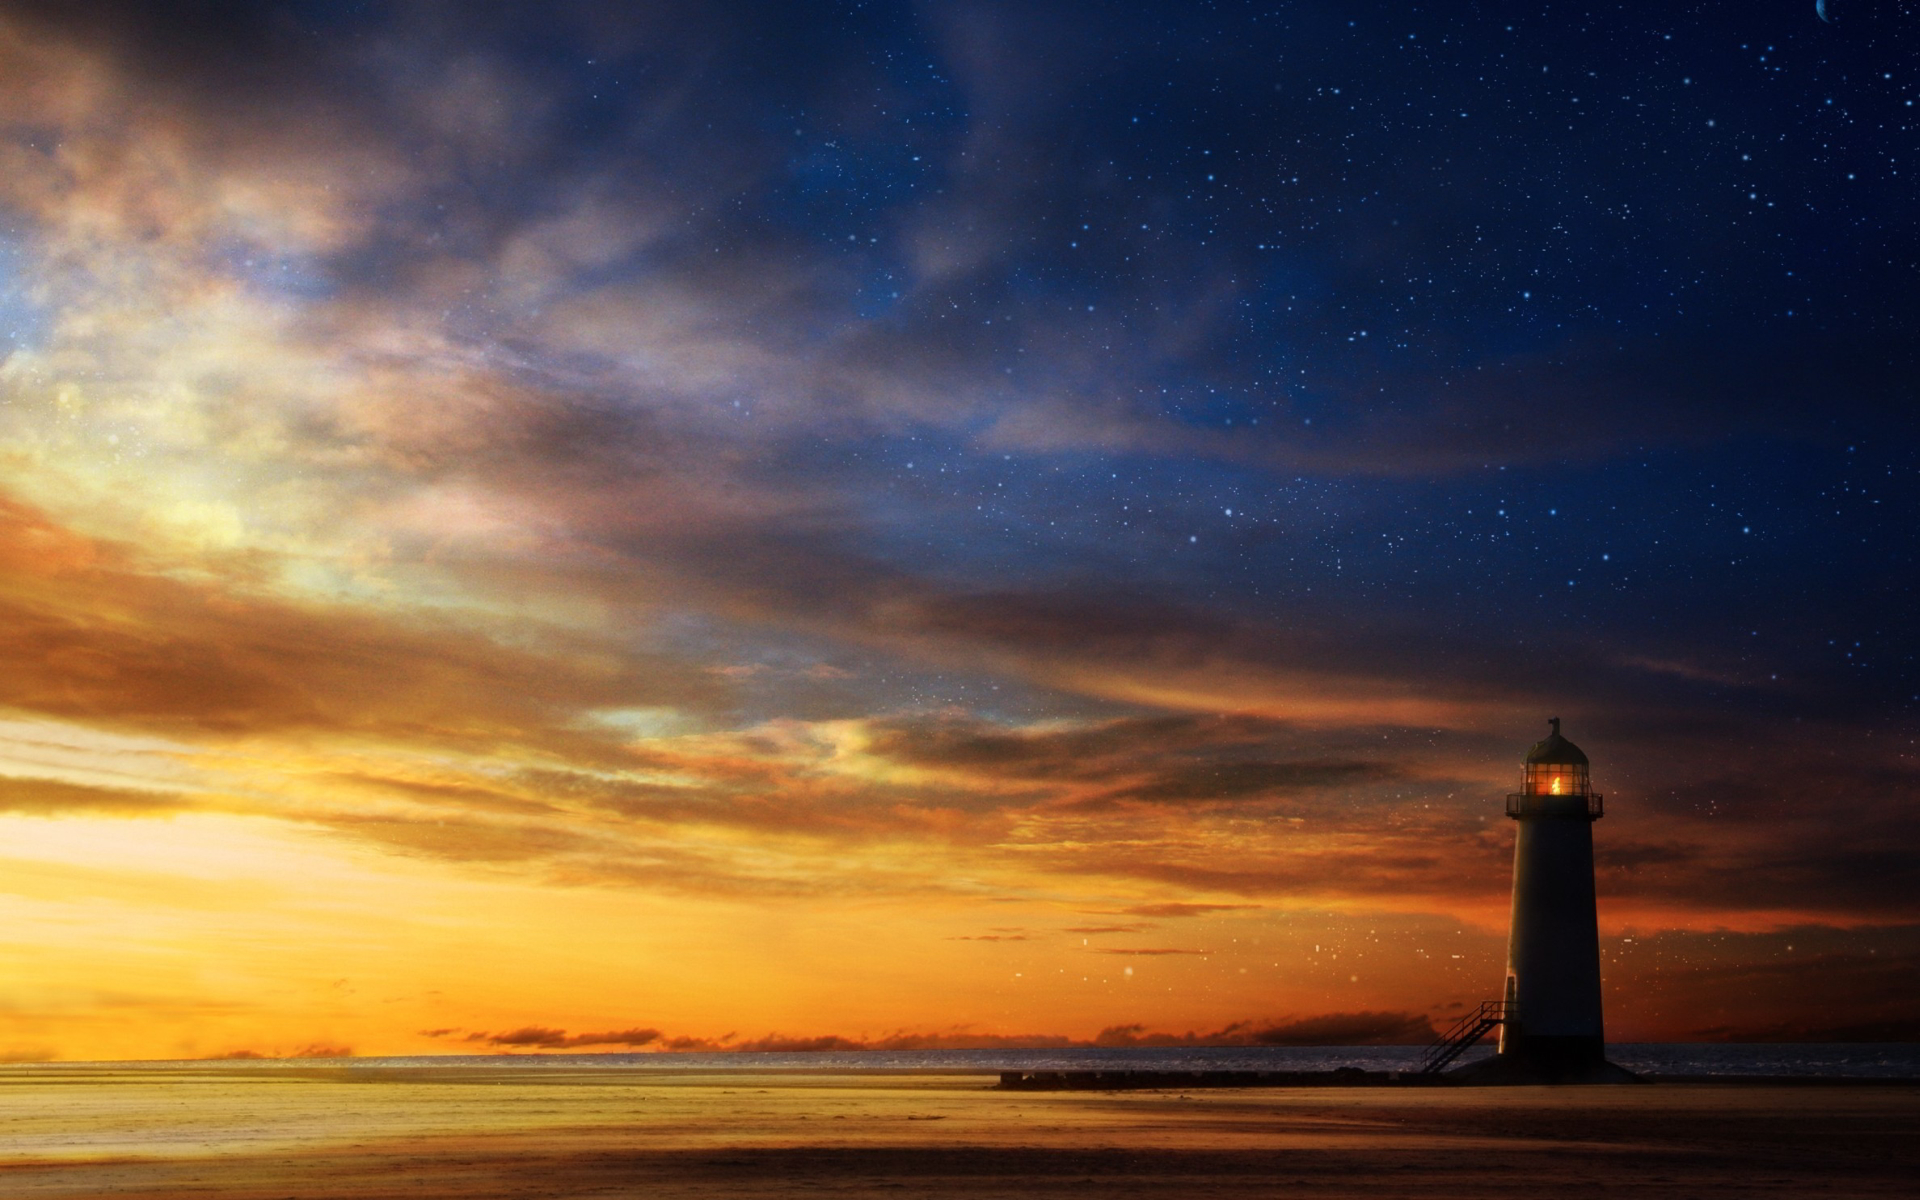 sunset pictures lighthouse - HD Desktop Wallpapers | 4k HD